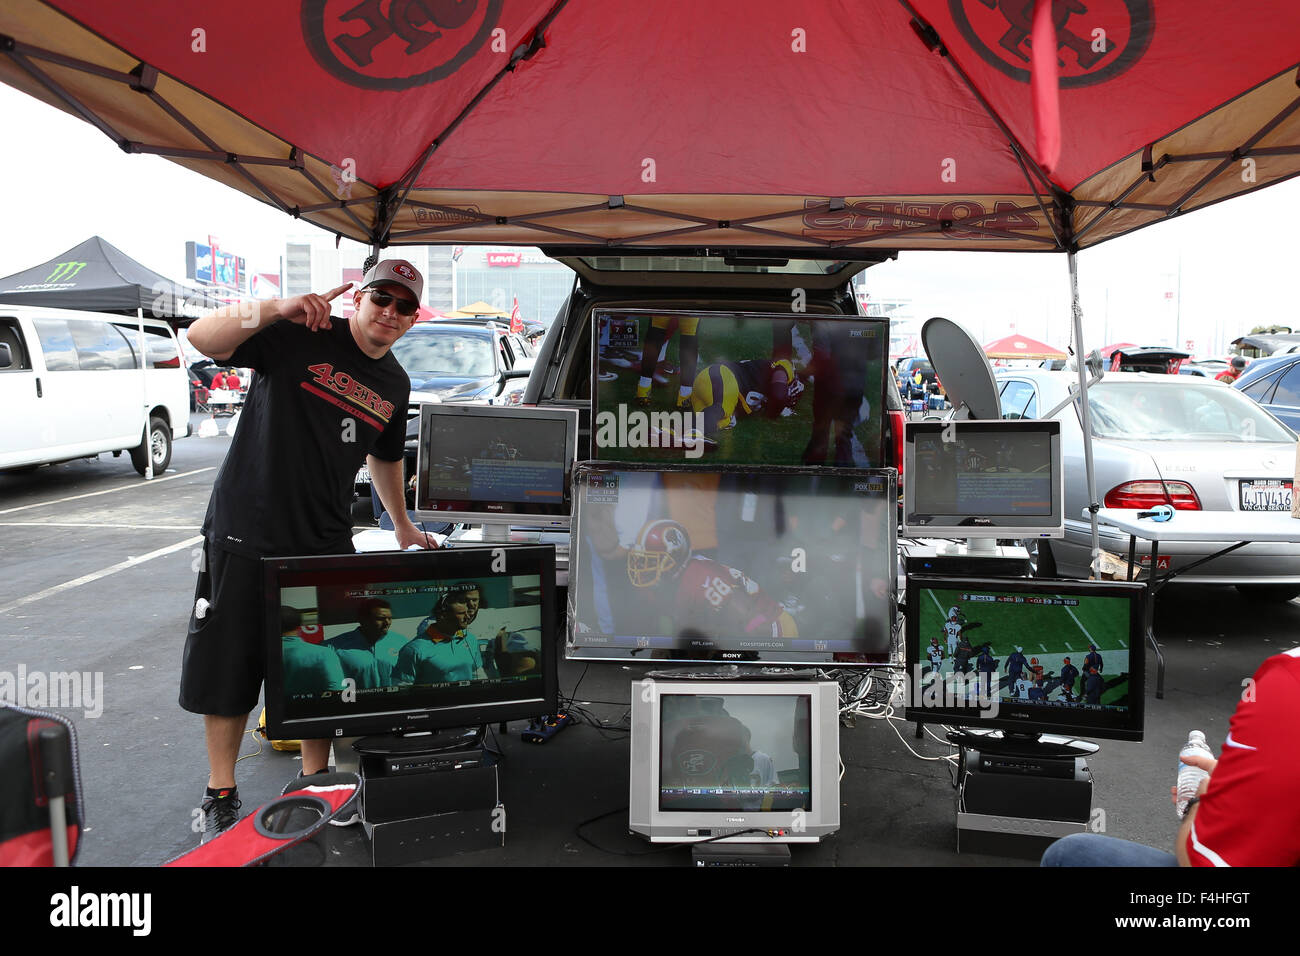 October 18, 2015: A 49ers fan shows off his seven television setup at a  tailgating event in the parking lot of Levi's Stadium prior to the start of  the NFL football game